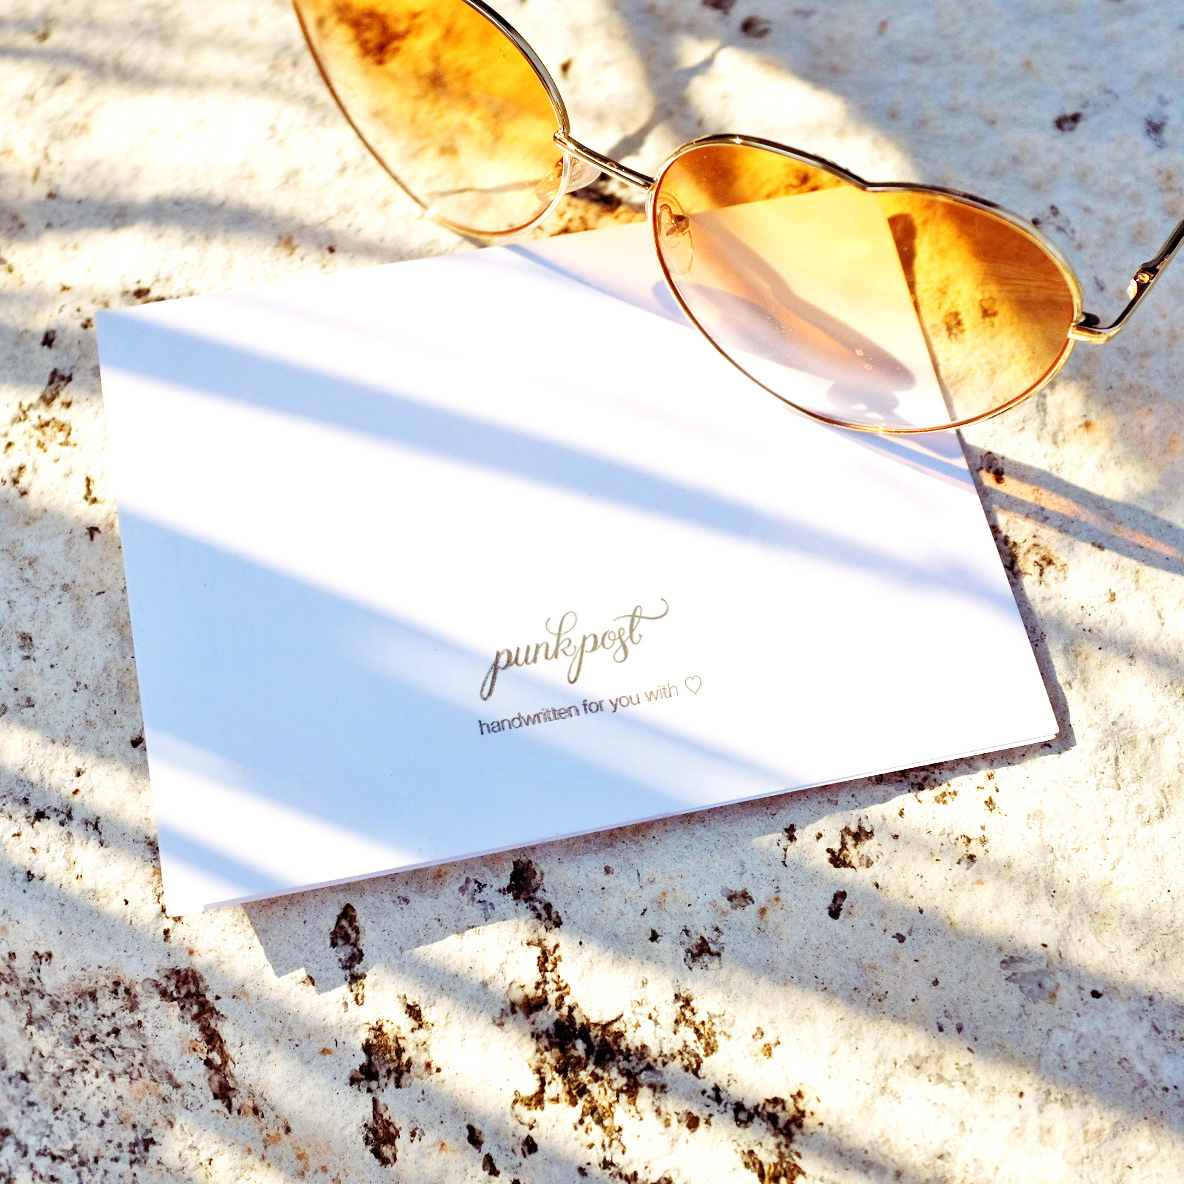 A face down greeting card with orange, heart-shaped sunglasses. Small lettering on the card reads “punkpost” in scripted font and “handwritten for you with” and a heart. 